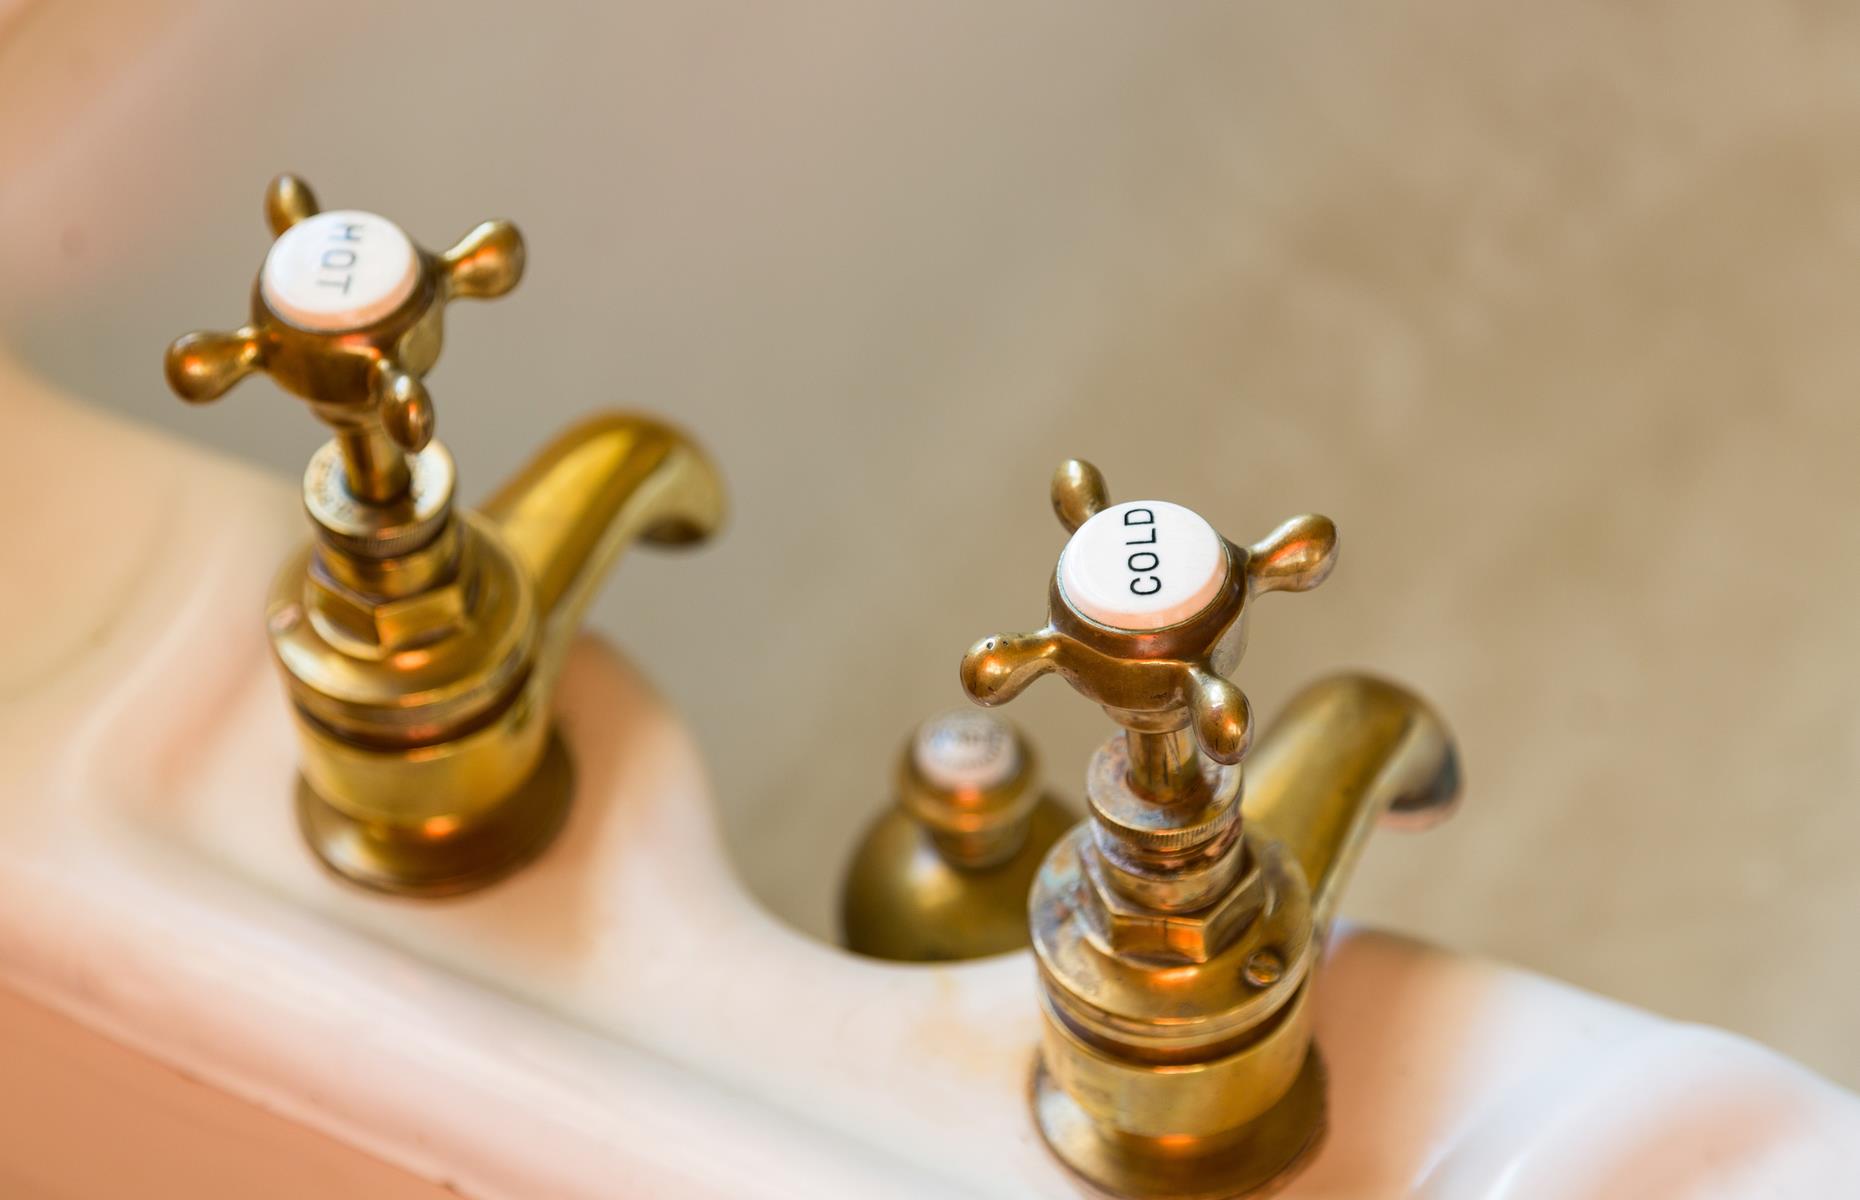 <p>Most countries have a singular faucet for their water but British bathrooms have separate taps for hot and cold. This concept dates back to after the Second World War when houses were built with a water storage tank in the attic – hot water is supplied by this tank while cold water comes straight from the mains.</p>  <p>It was presumed that the hot water source was more susceptible to contamination and deemed undrinkable. Thus, the ‘safe’ cold water is separated from the potentially risky warm supply.</p>